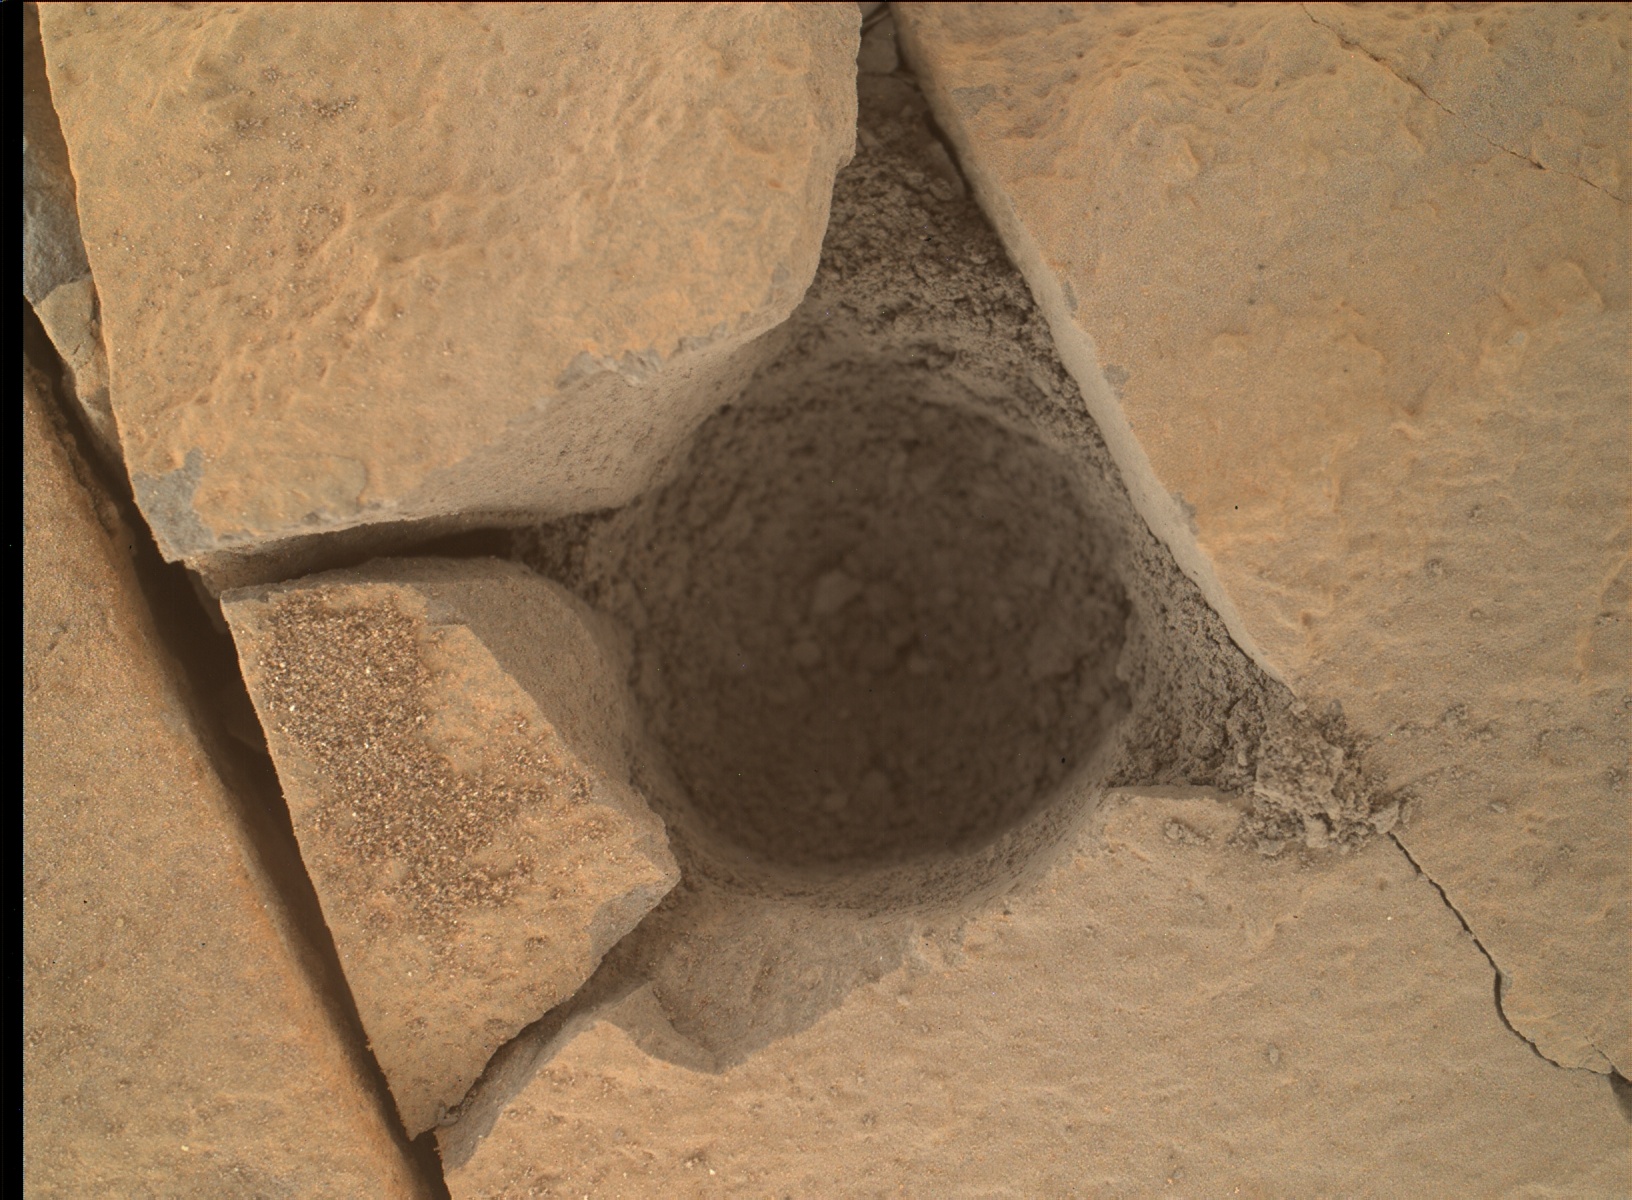 Nasa's Mars rover Curiosity acquired this image using its Mars Hand Lens Imager (MAHLI) on Sol 867